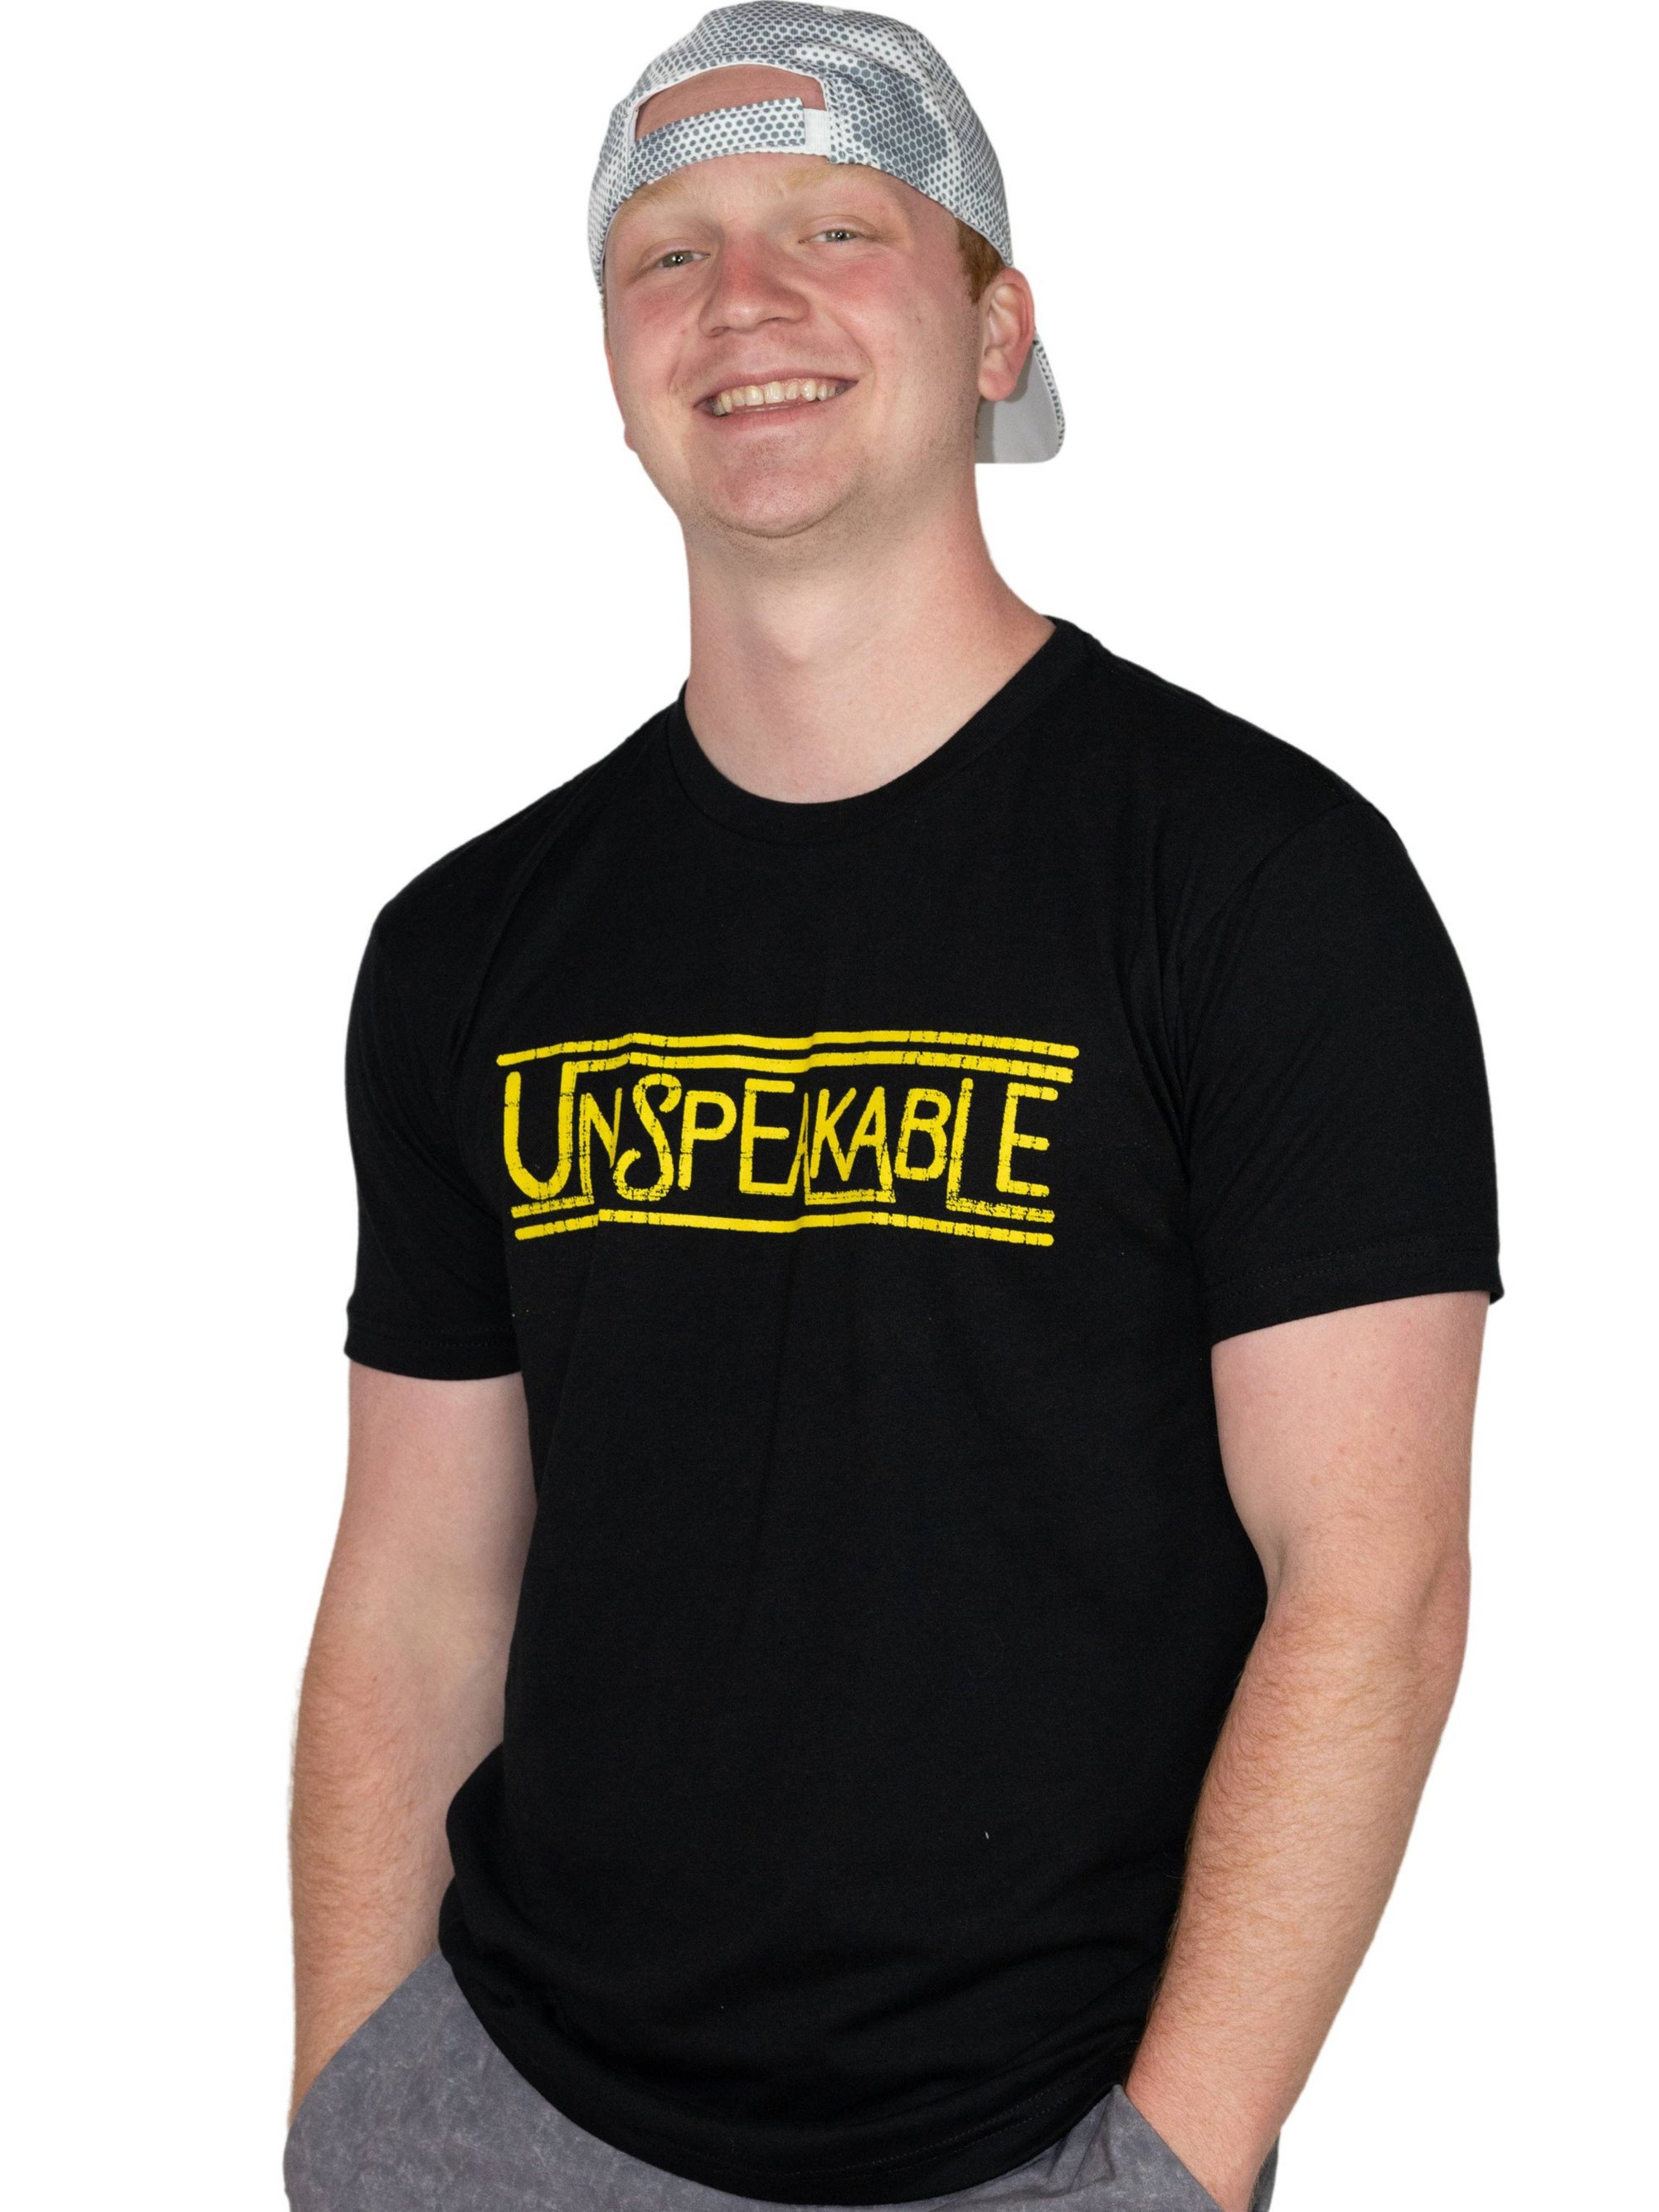 BLACK T-SHIRT WITH YELLOW FONT - UnspeakableGaming